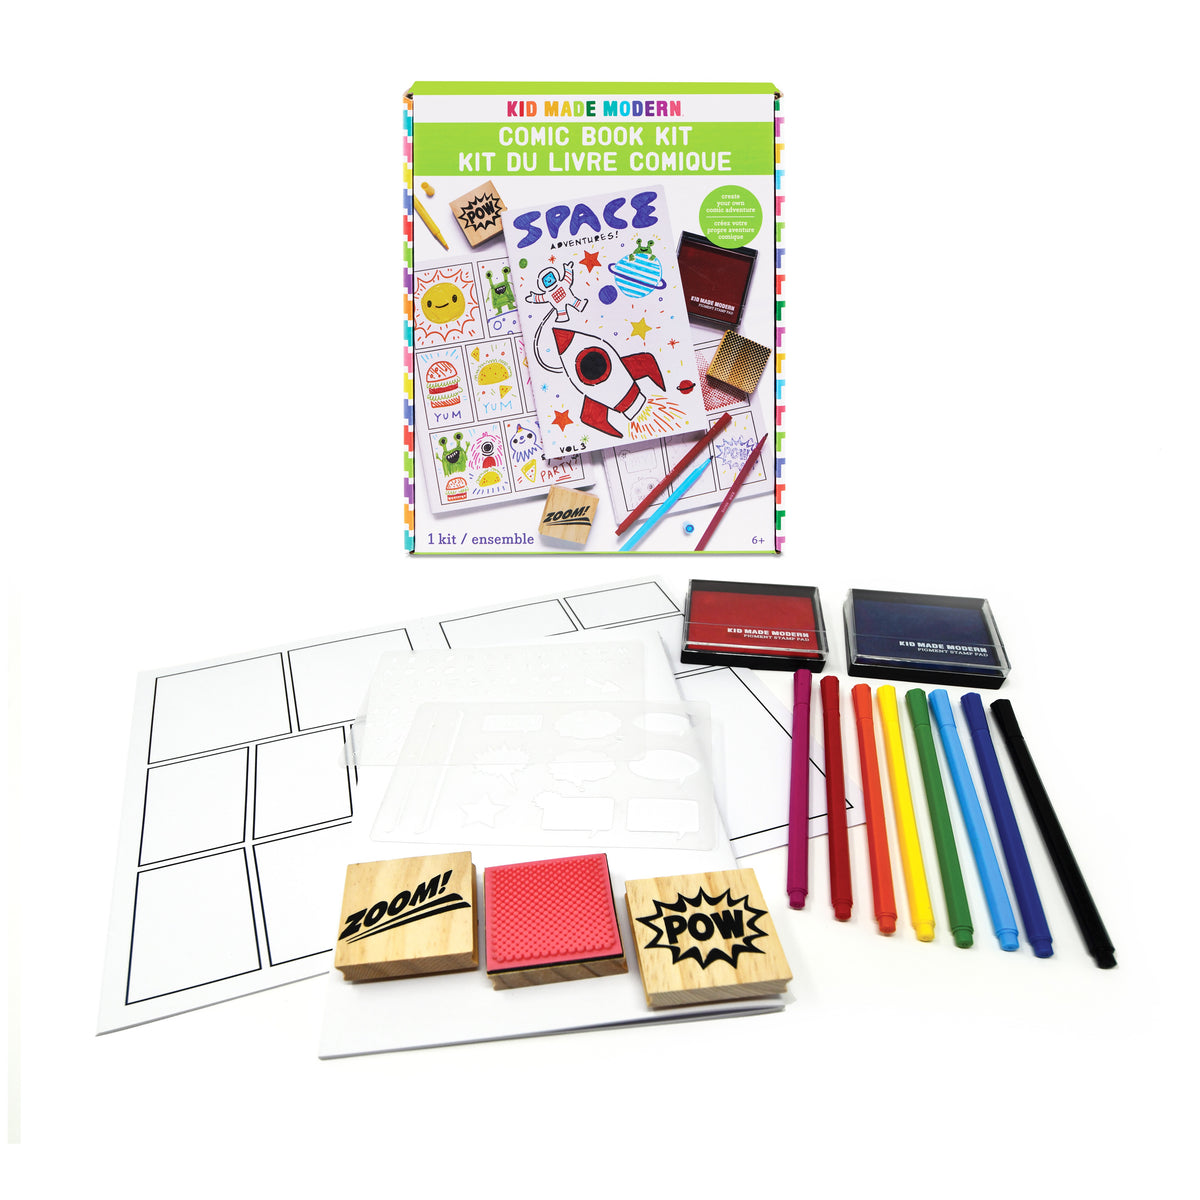 Story Book & Comic Book Kits for Kids